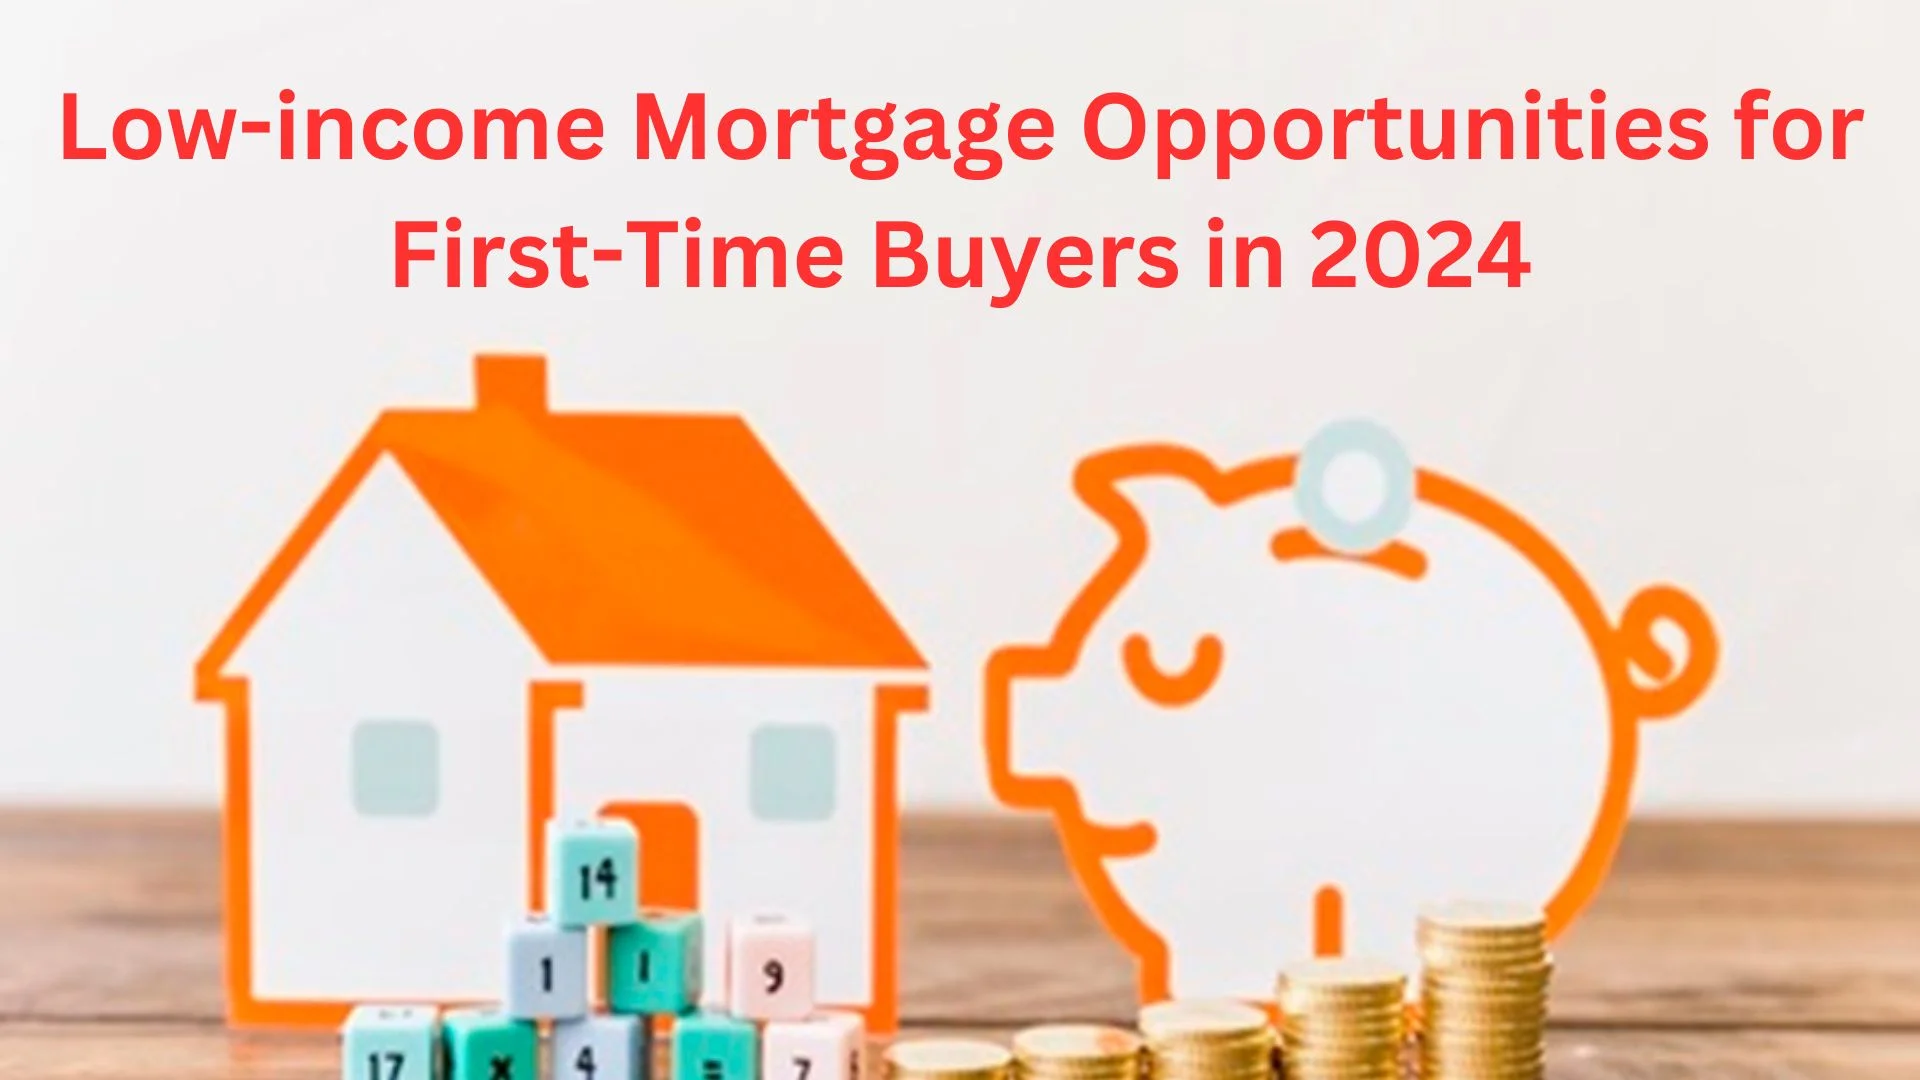 Low-income Mortgage Opportunities for First-Time Buyers in 2024